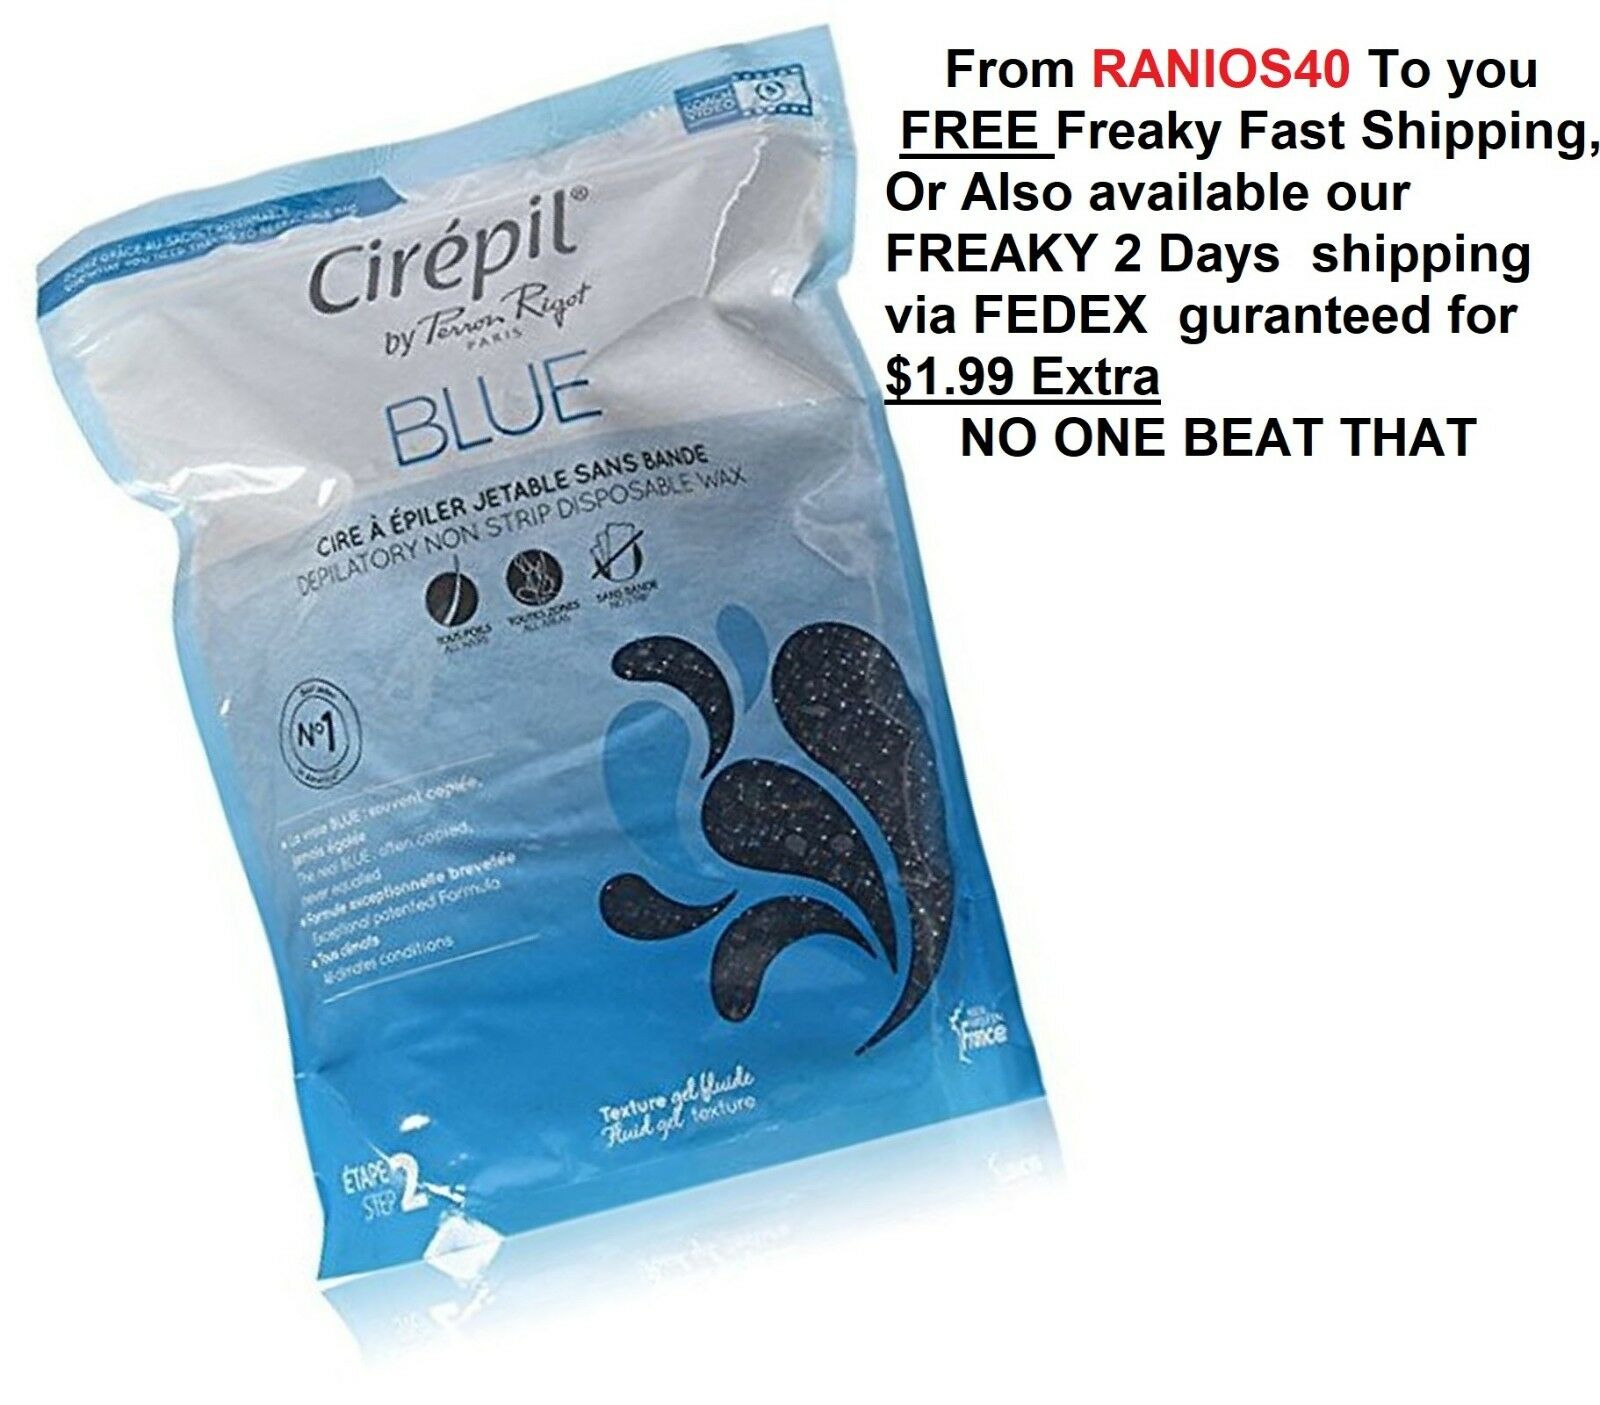 Cirepil Blue Wax Refill, 14.11 Ounce Bag 400 Gram-freaky Fast Shipping As Always